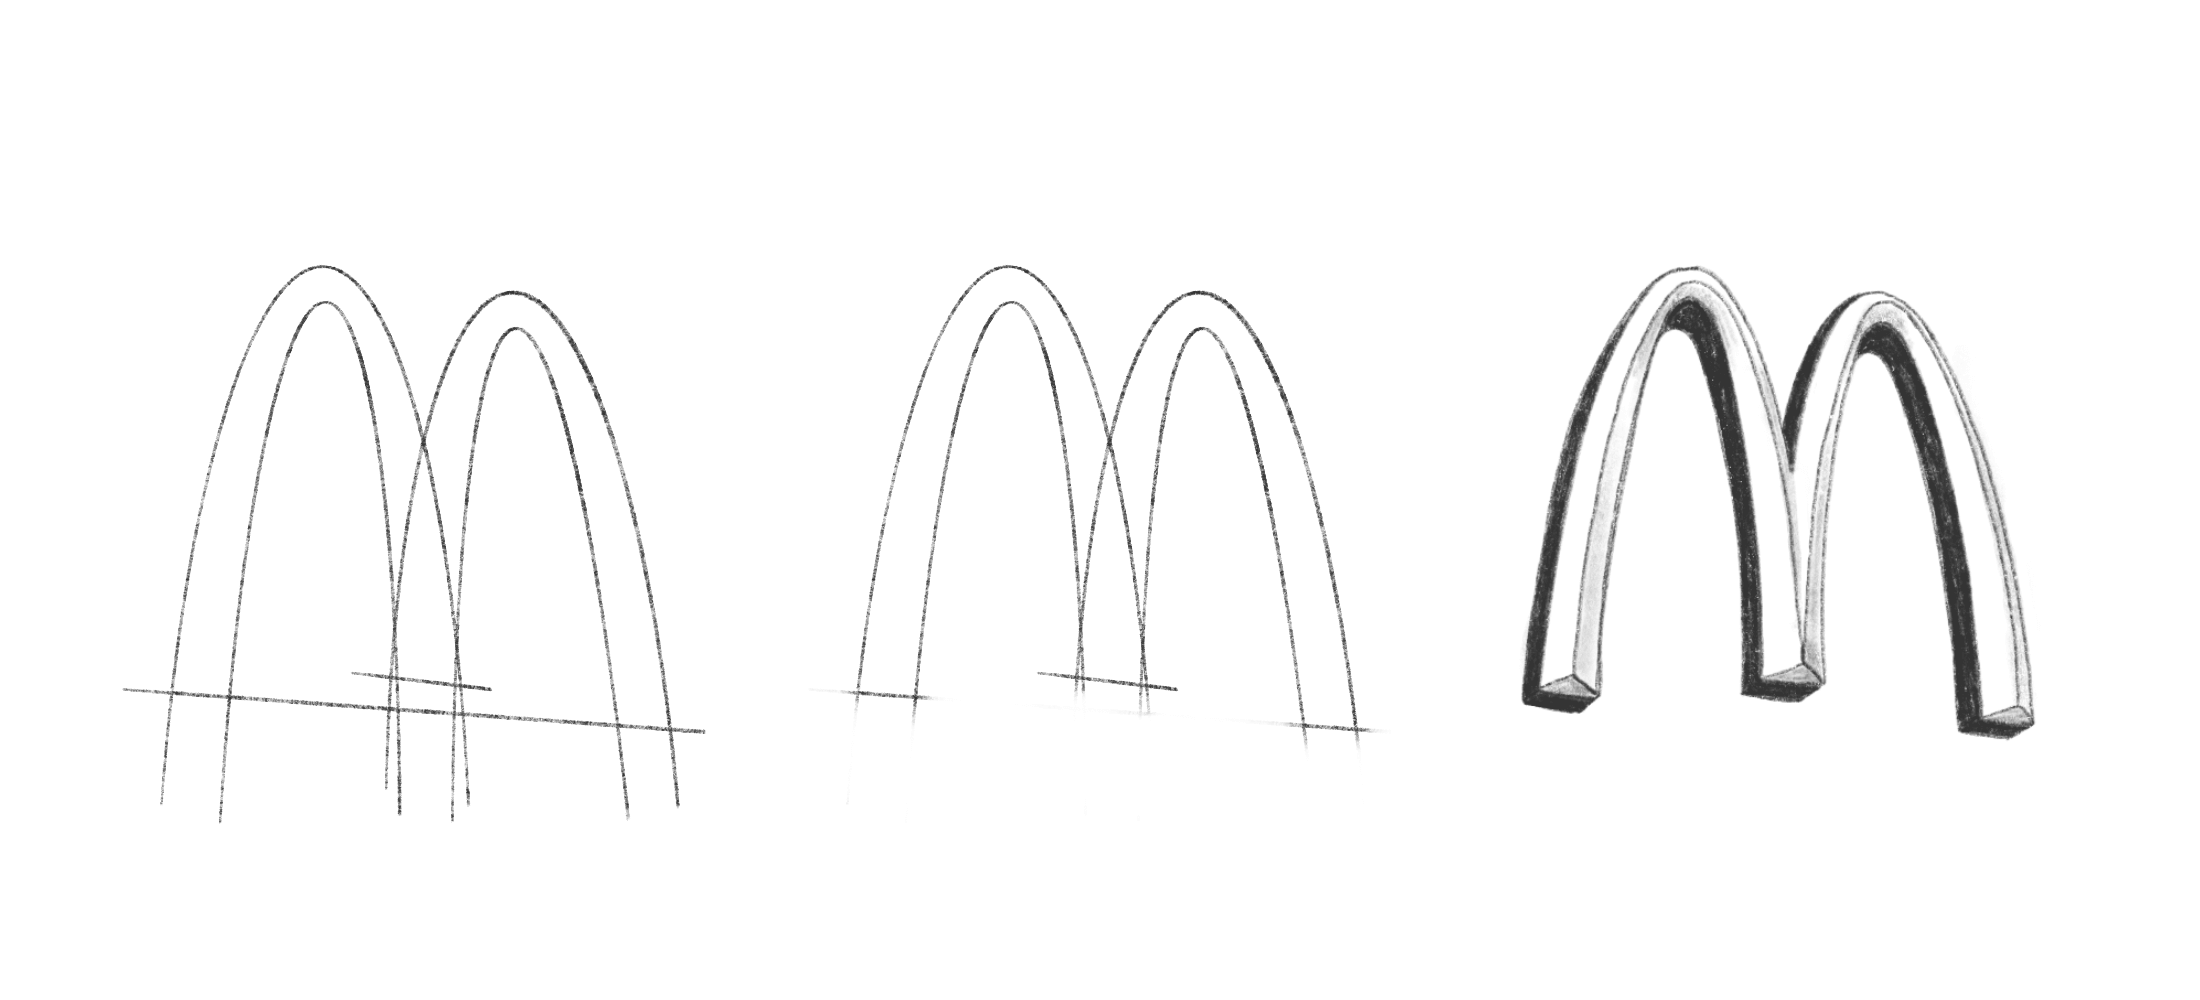 A step-by-step easy drawing guide for drawing the McDonald's logo